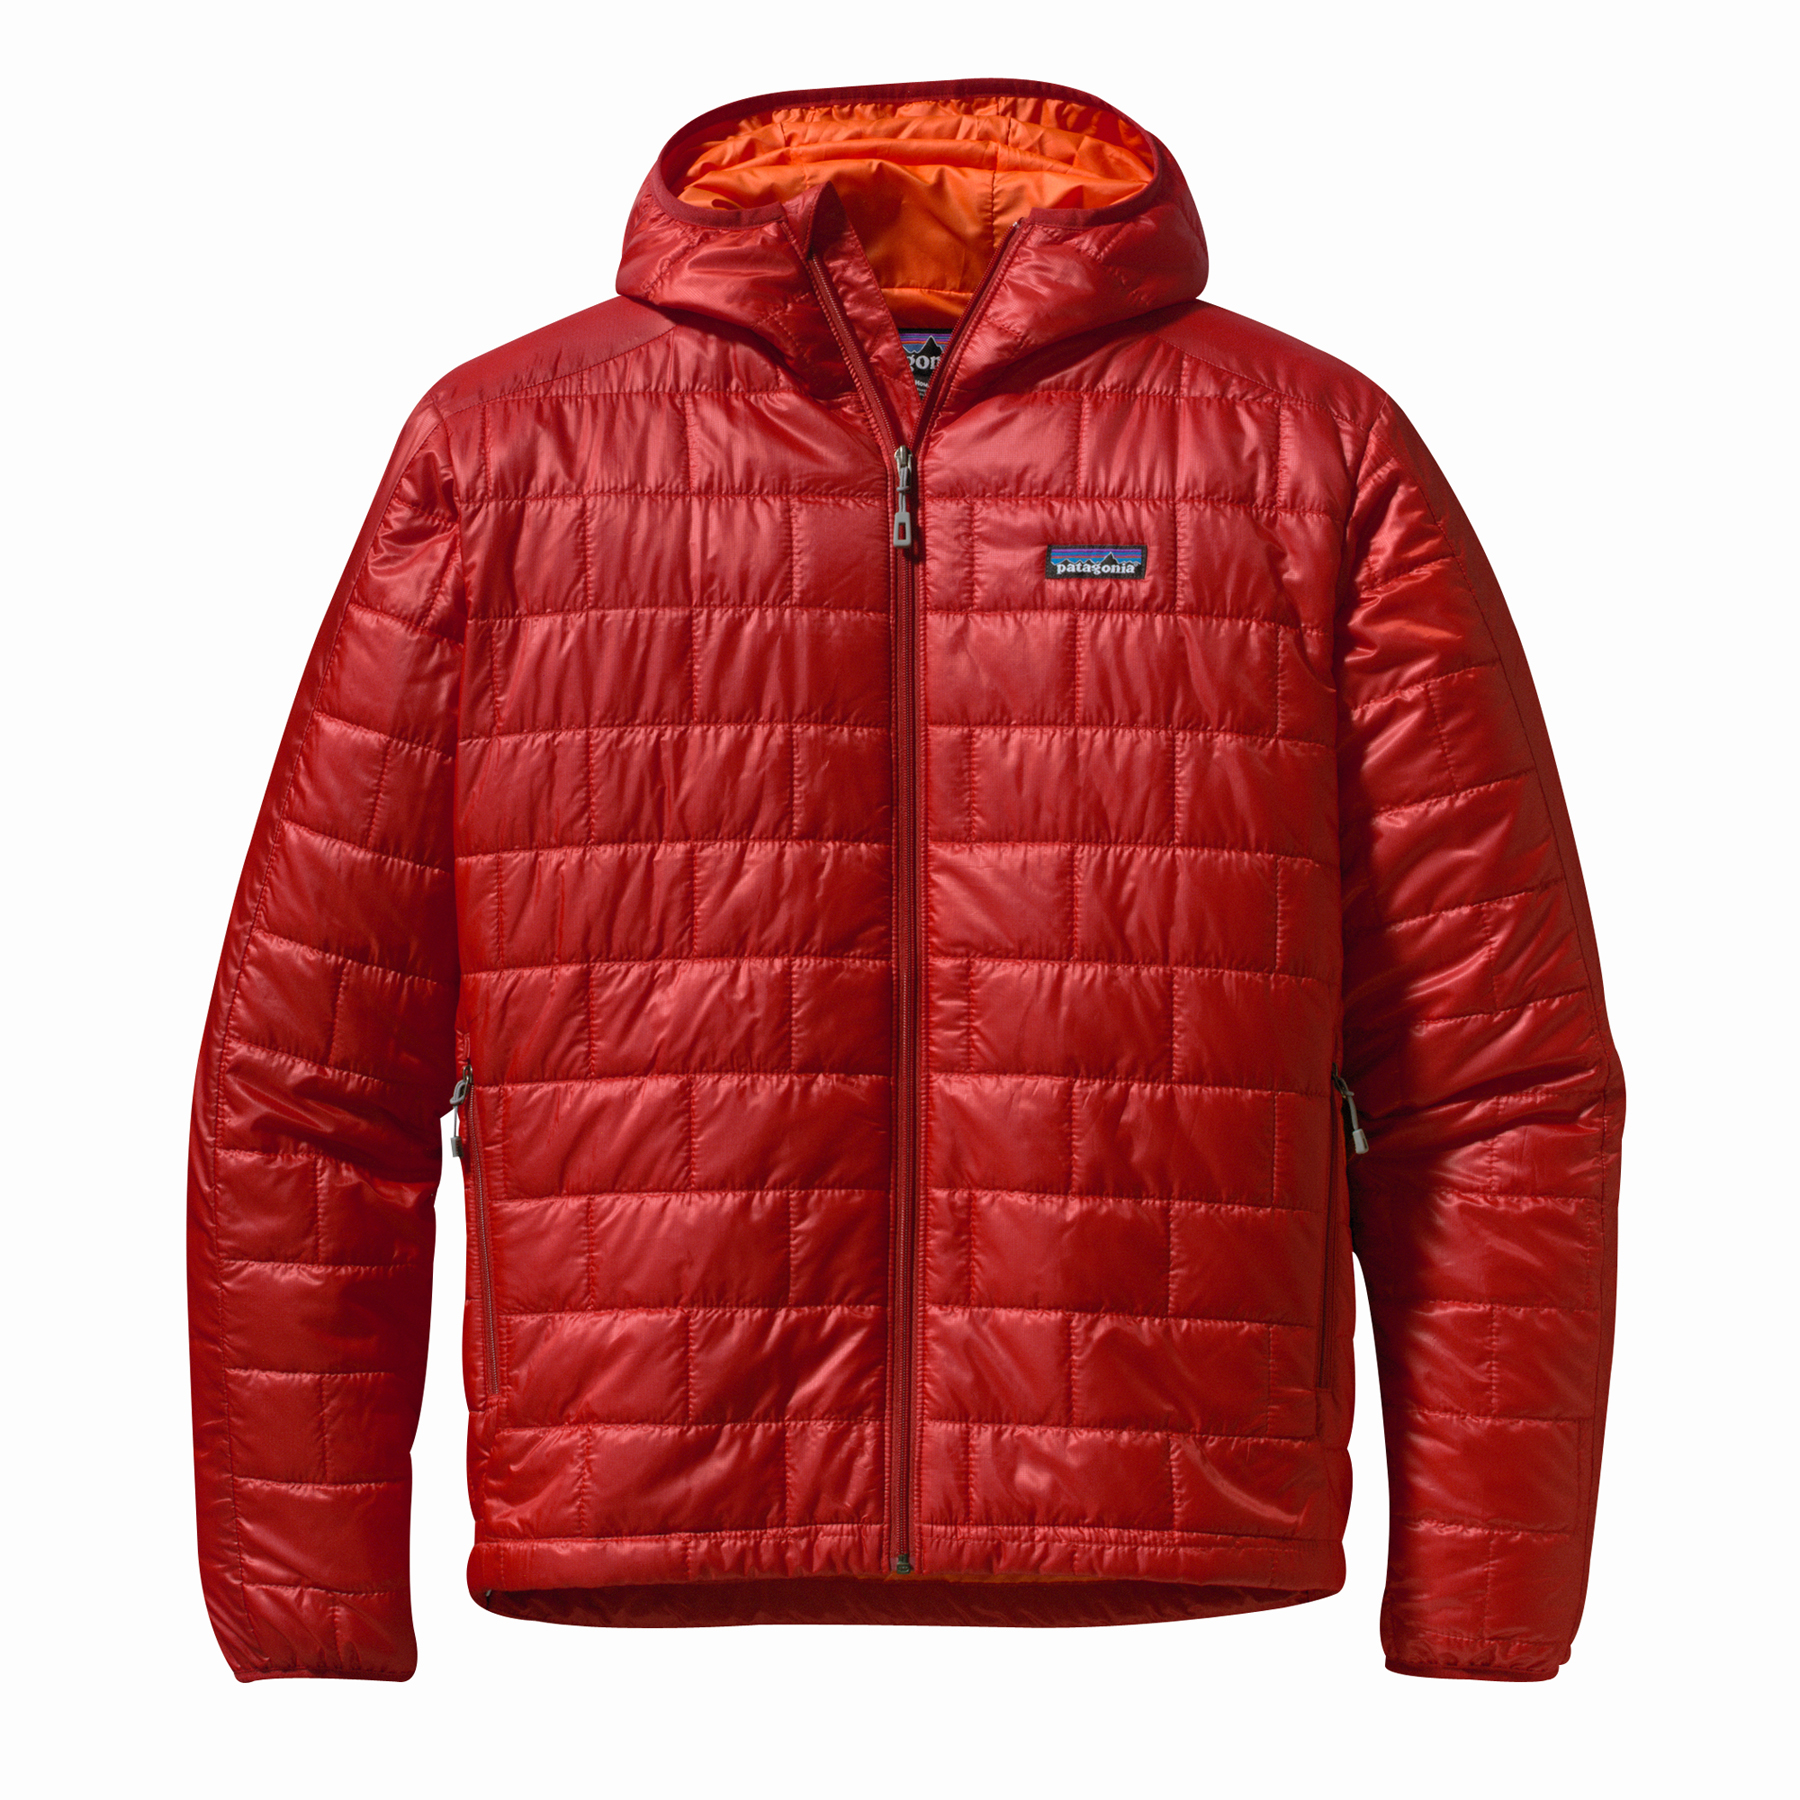 north face thermoball vs patagonia micro puff